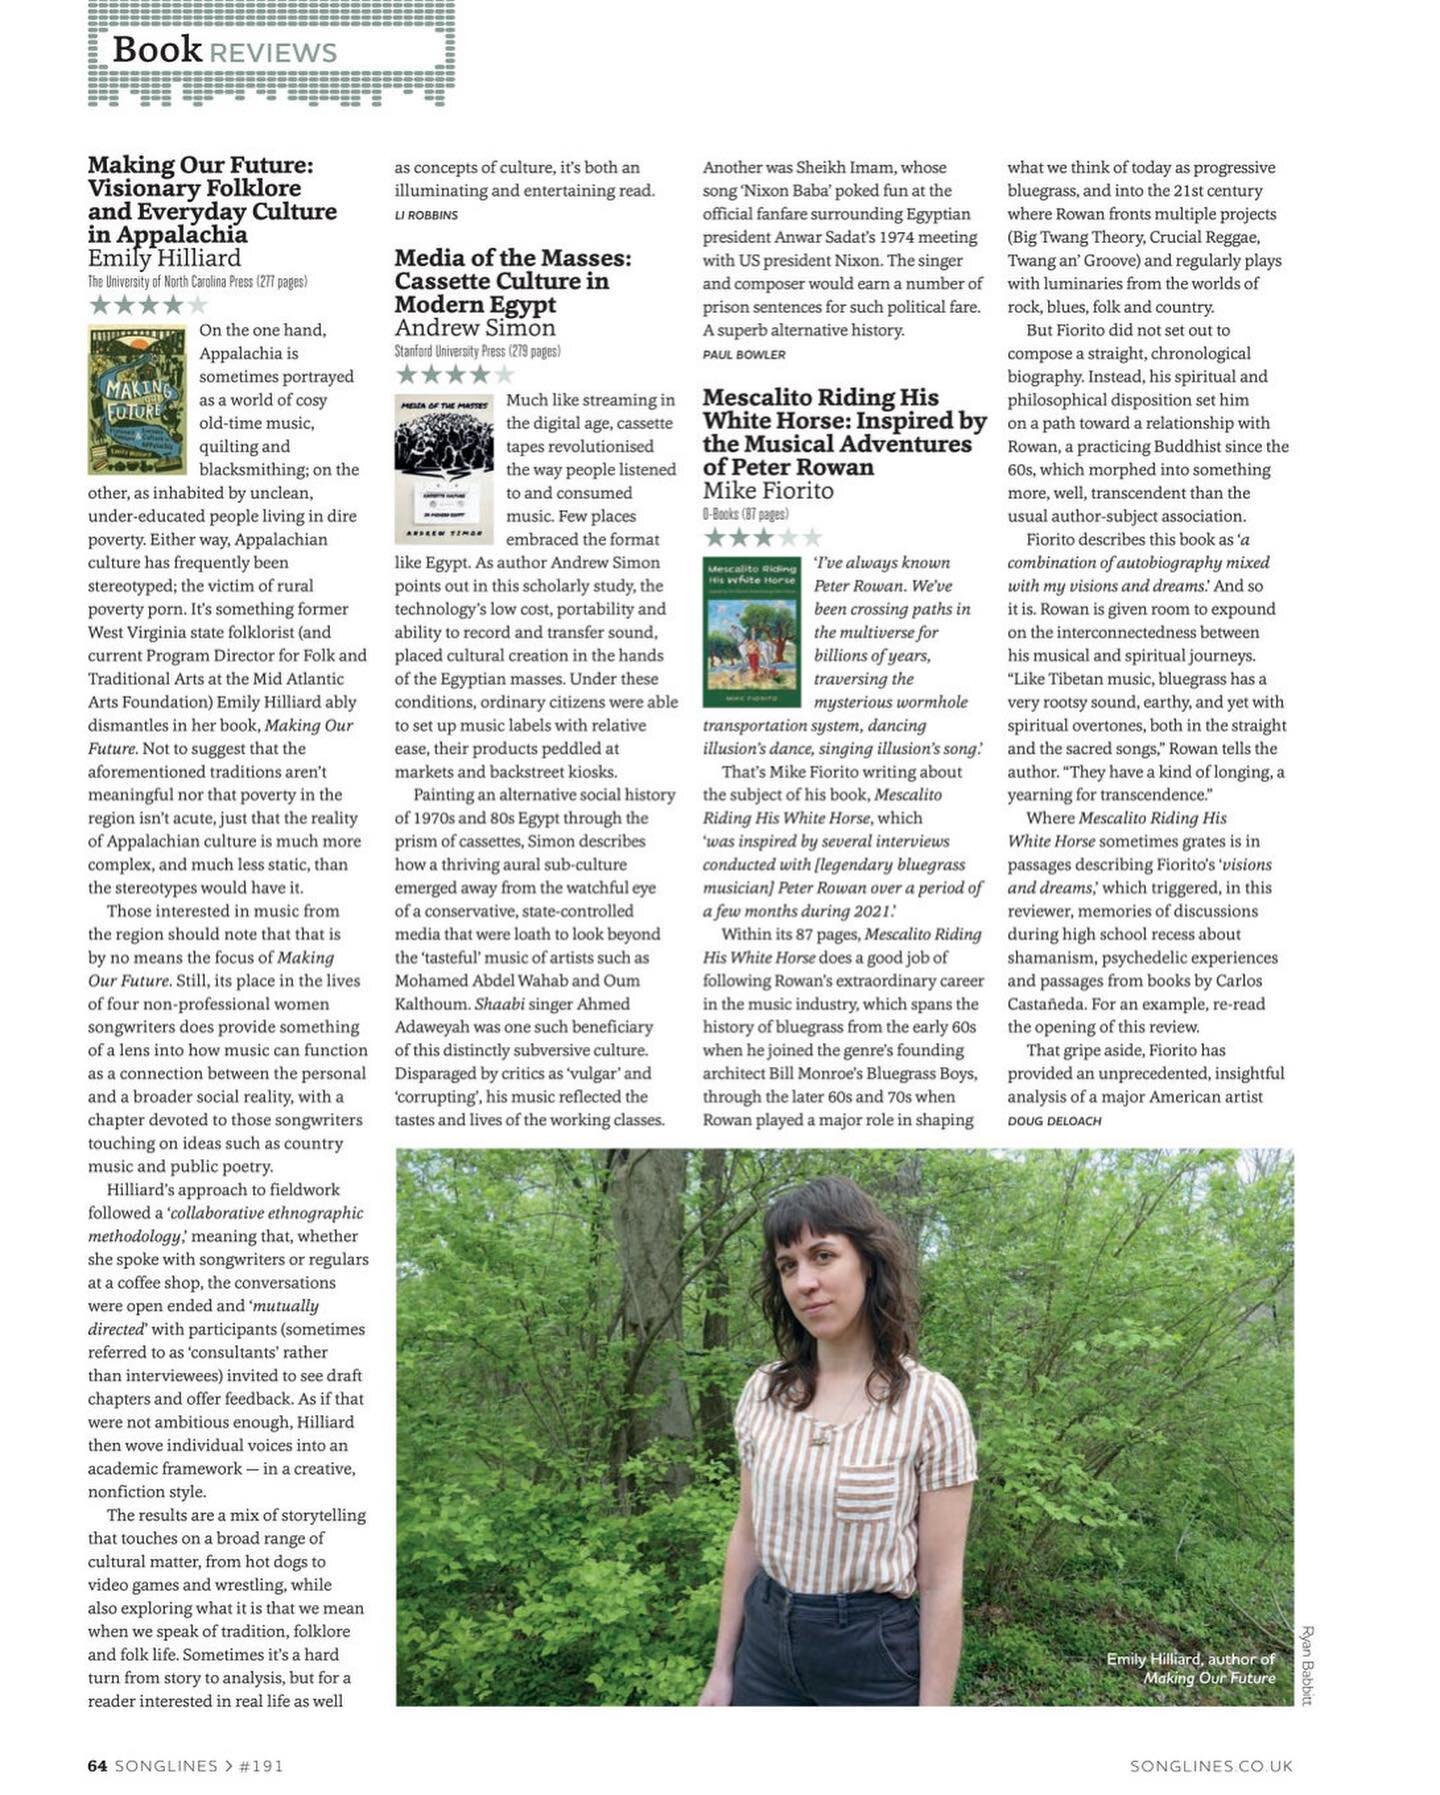 We've often had our albums reviewed in @songlinesmagazine, but this month our own @hey_emhilly gets a turn at a review in the October issue of the mag for her book Making Our Future: Visionary Folklore and Everyday Culture in Appalachia (@uncpress, 2